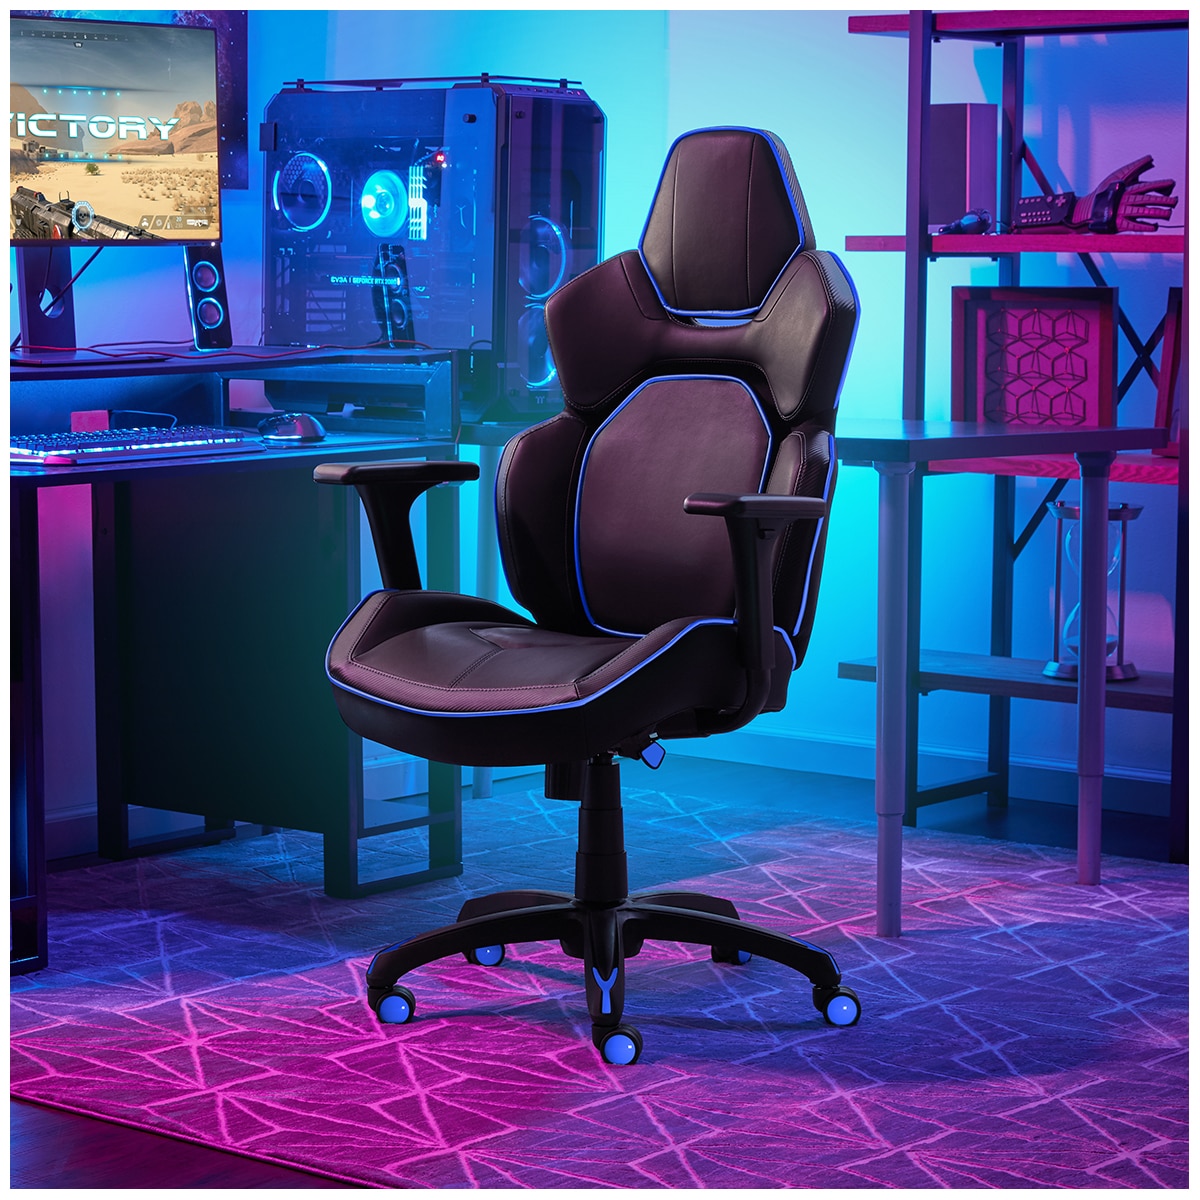 LF 3D Insight Gaming Chair - Blue